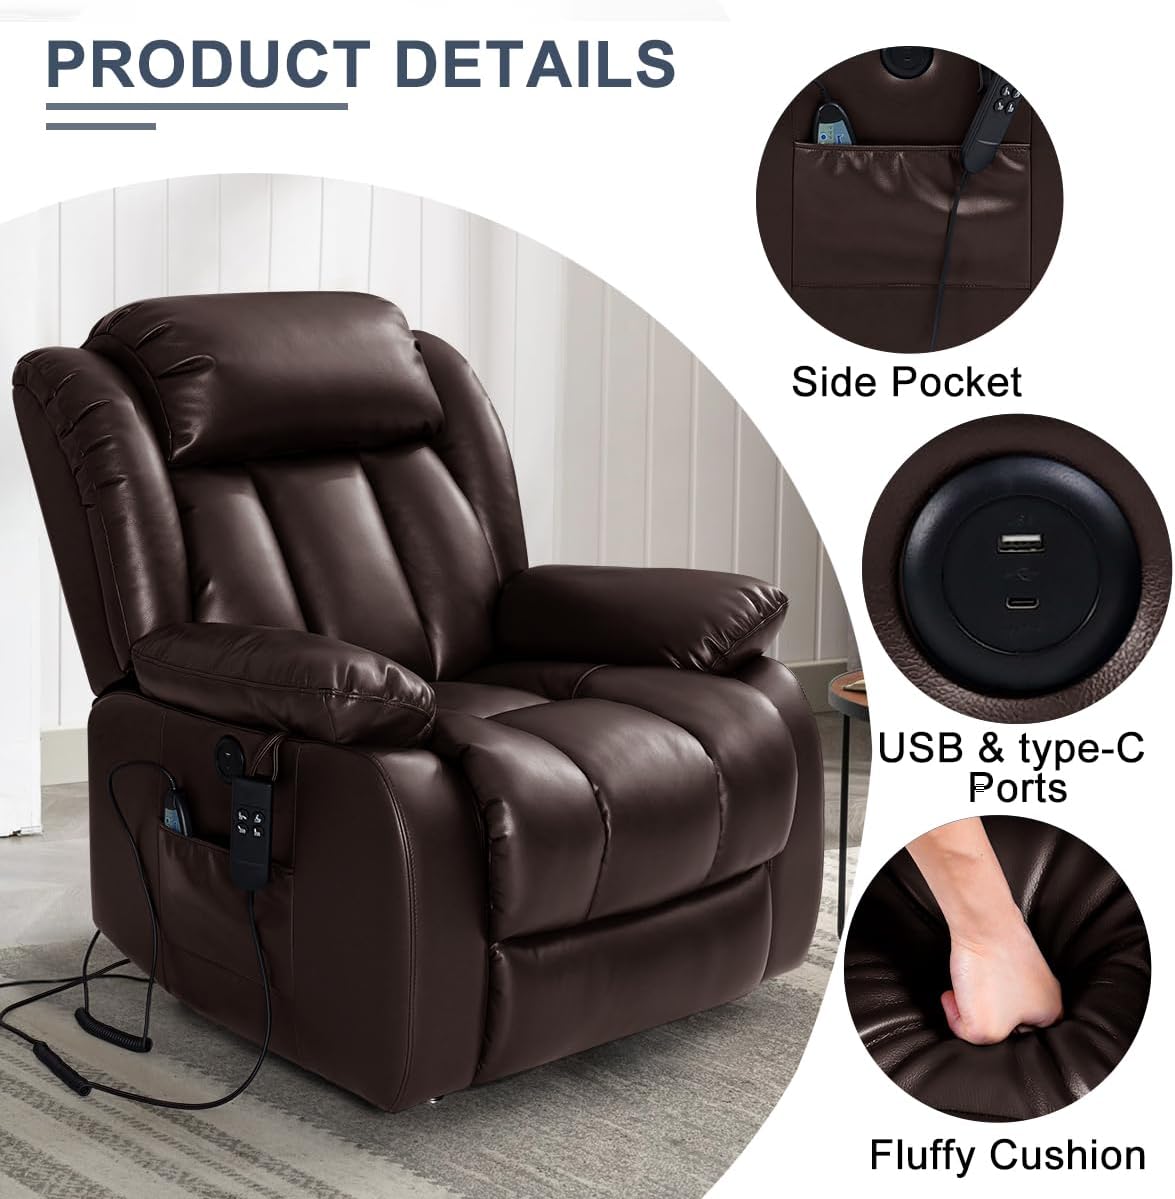 COCOLHOME Lay Flat Recliner Chair details